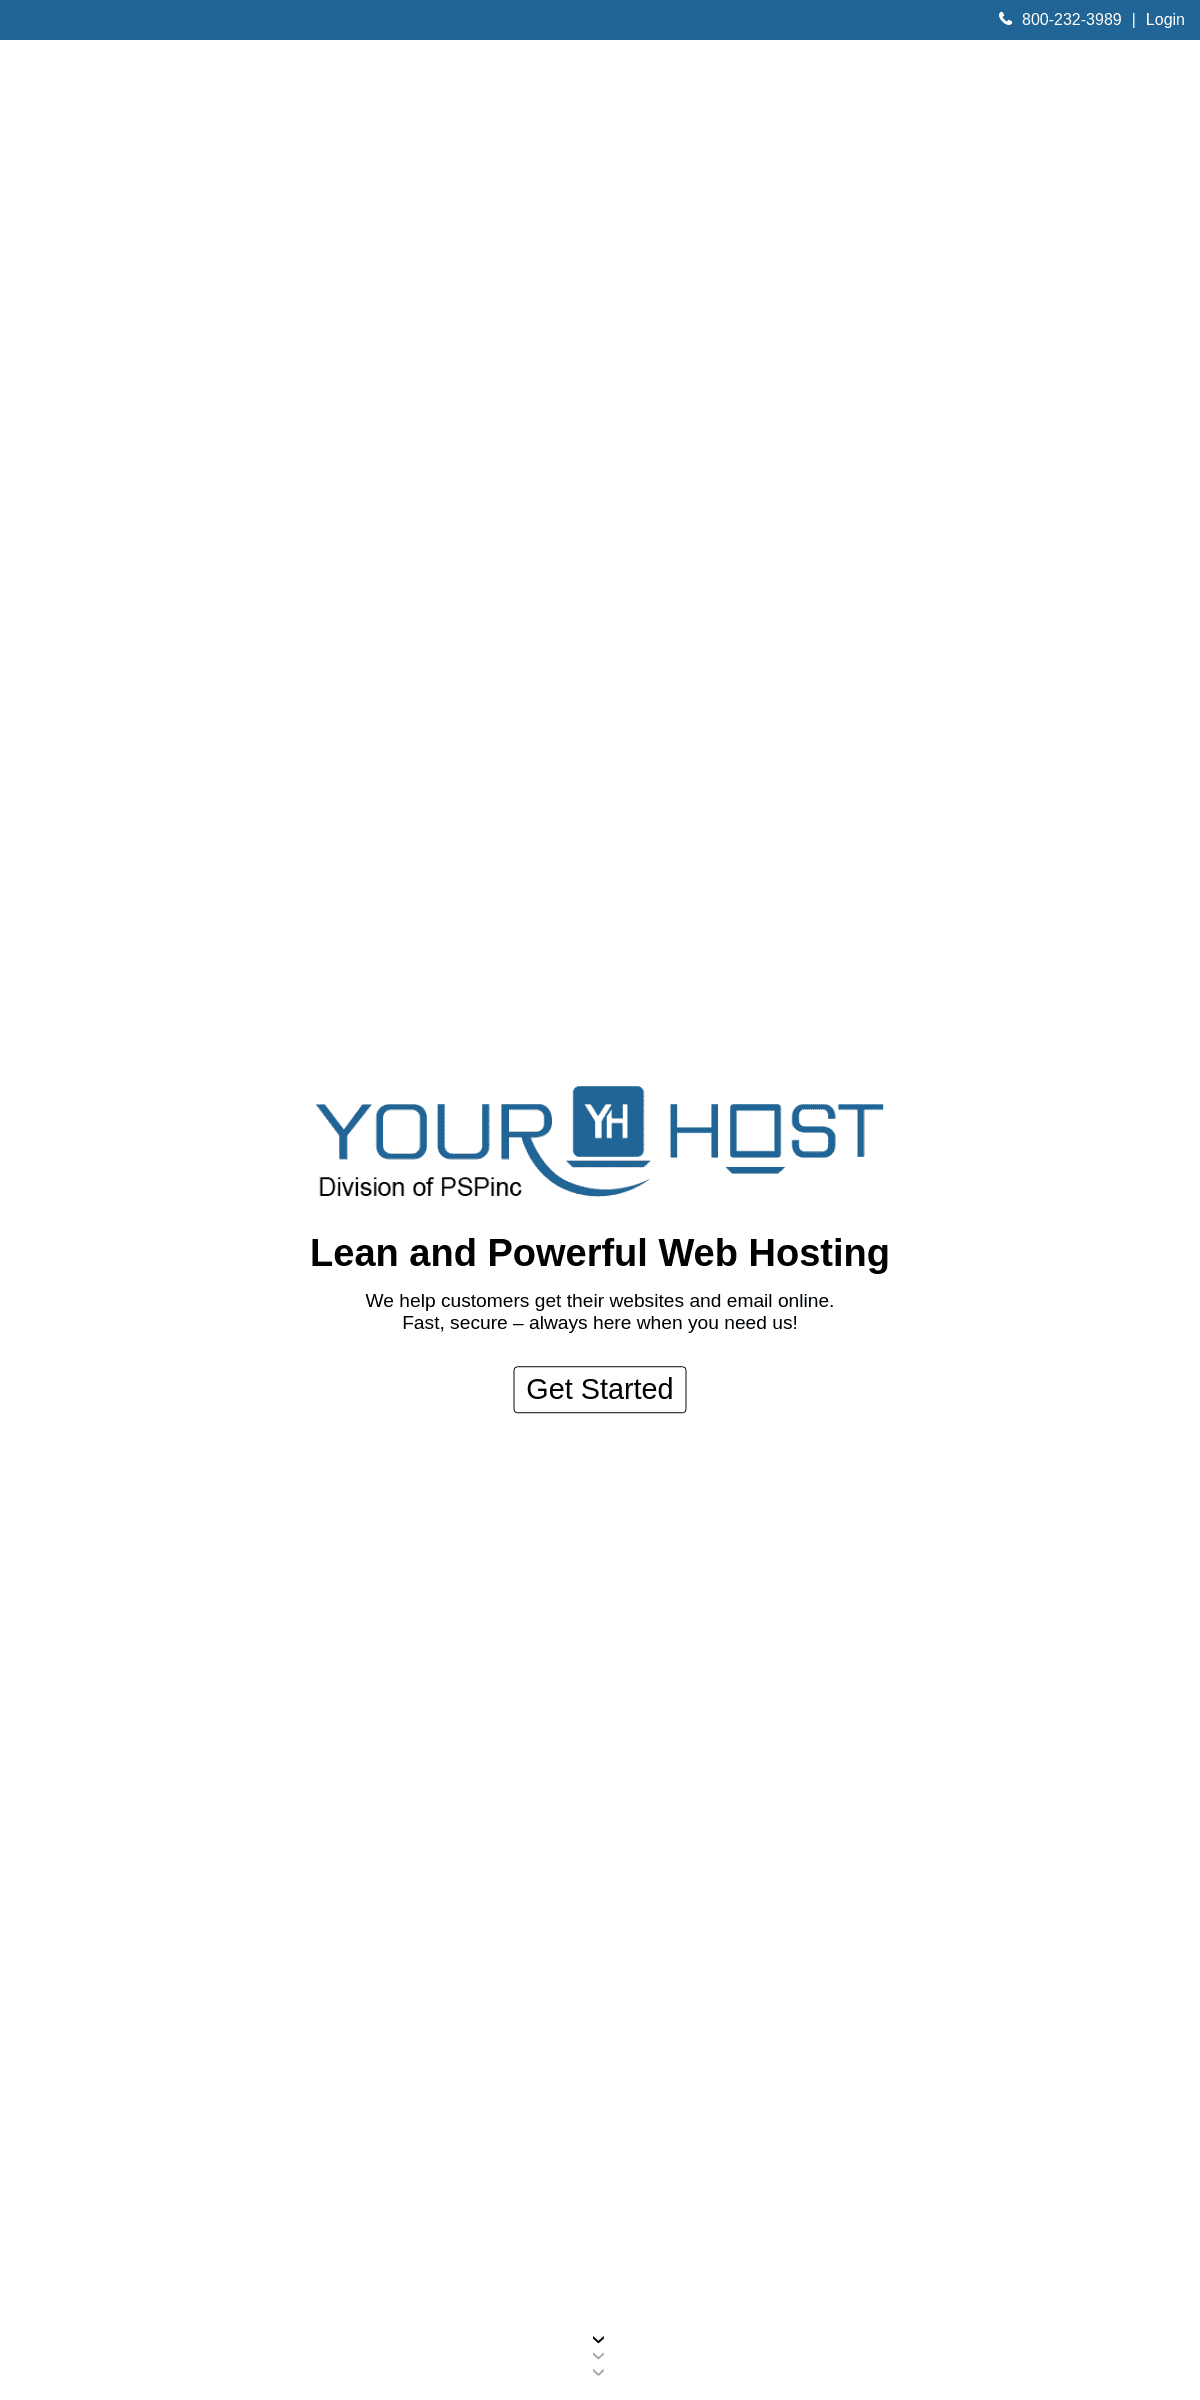 A complete backup of yourhost.com